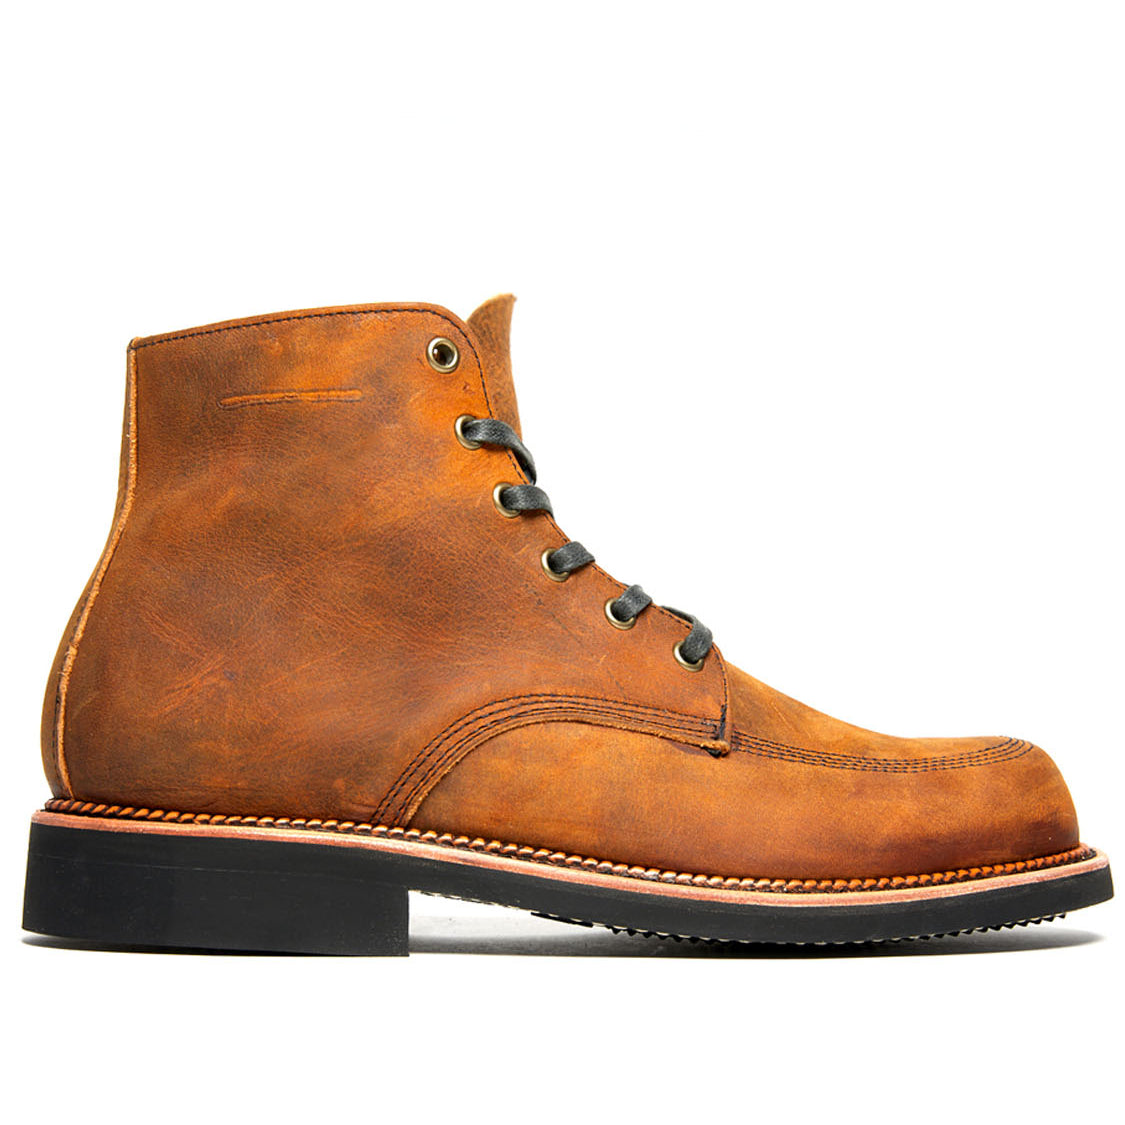 The comfortable Davis boot in tan leather by Broken Homme.